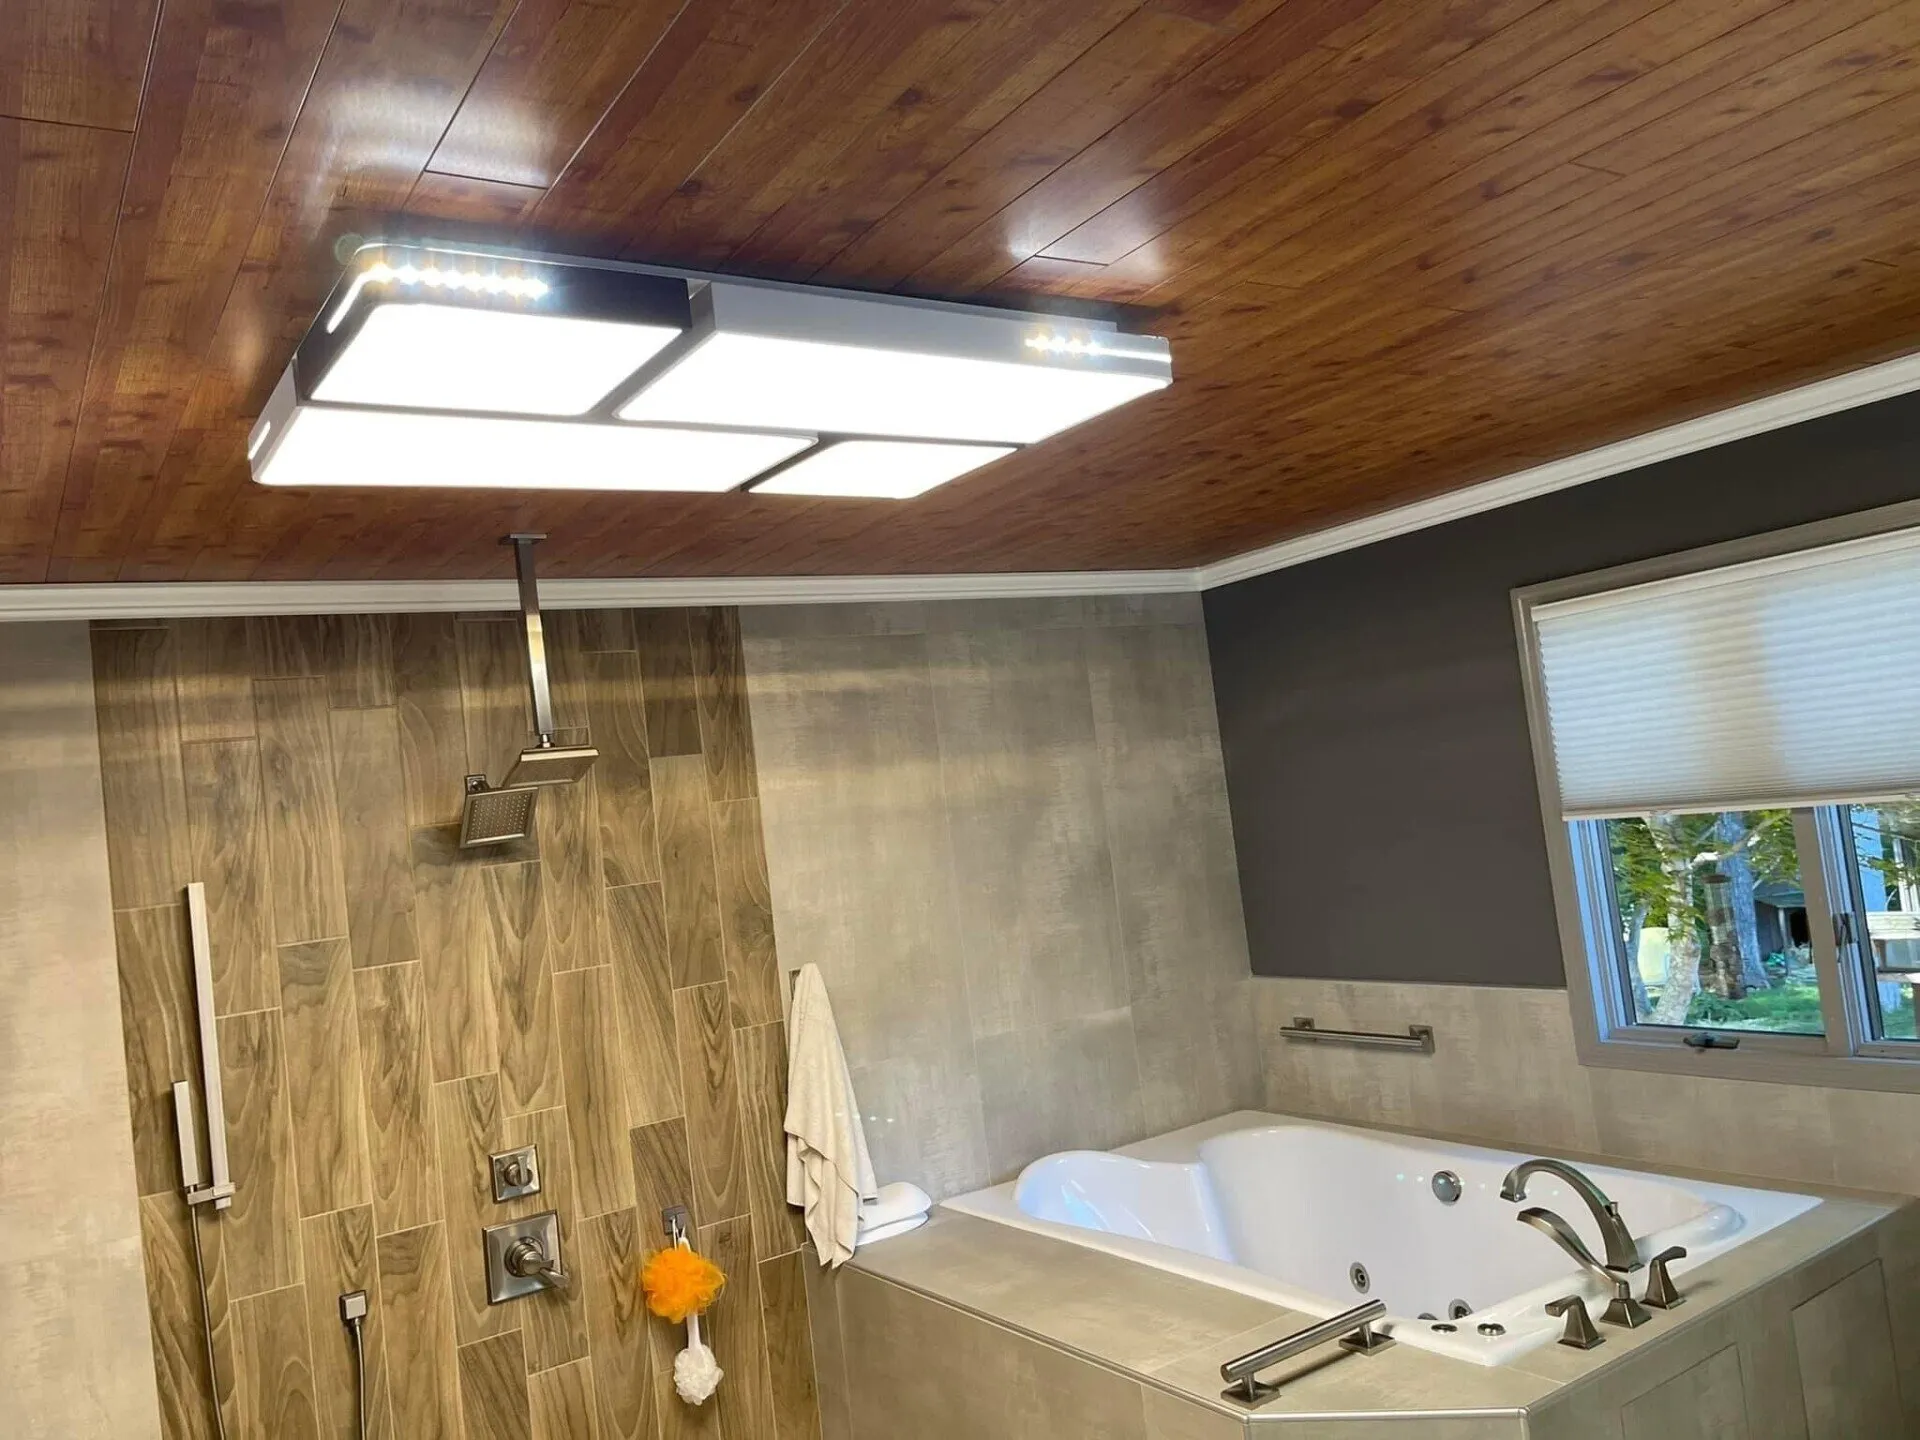 A bathroom with a tub, shower and tiled walls.